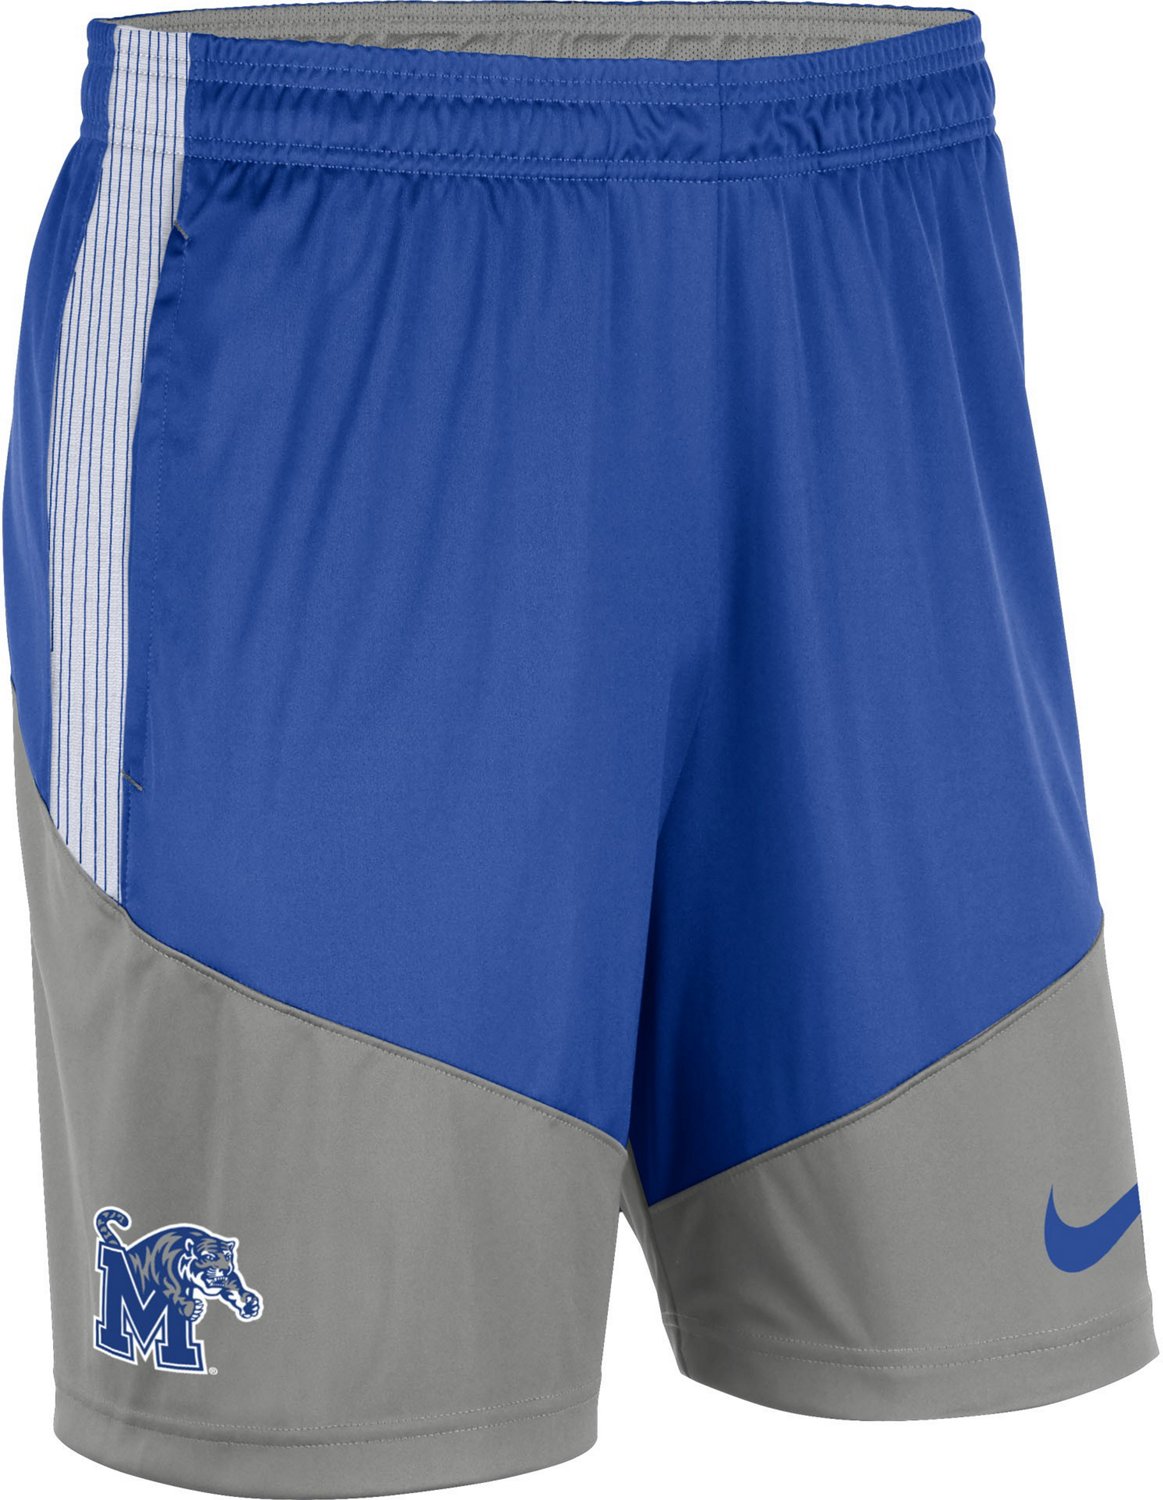 Nike Men's University of Memphis Player Shorts 7 in | Academy